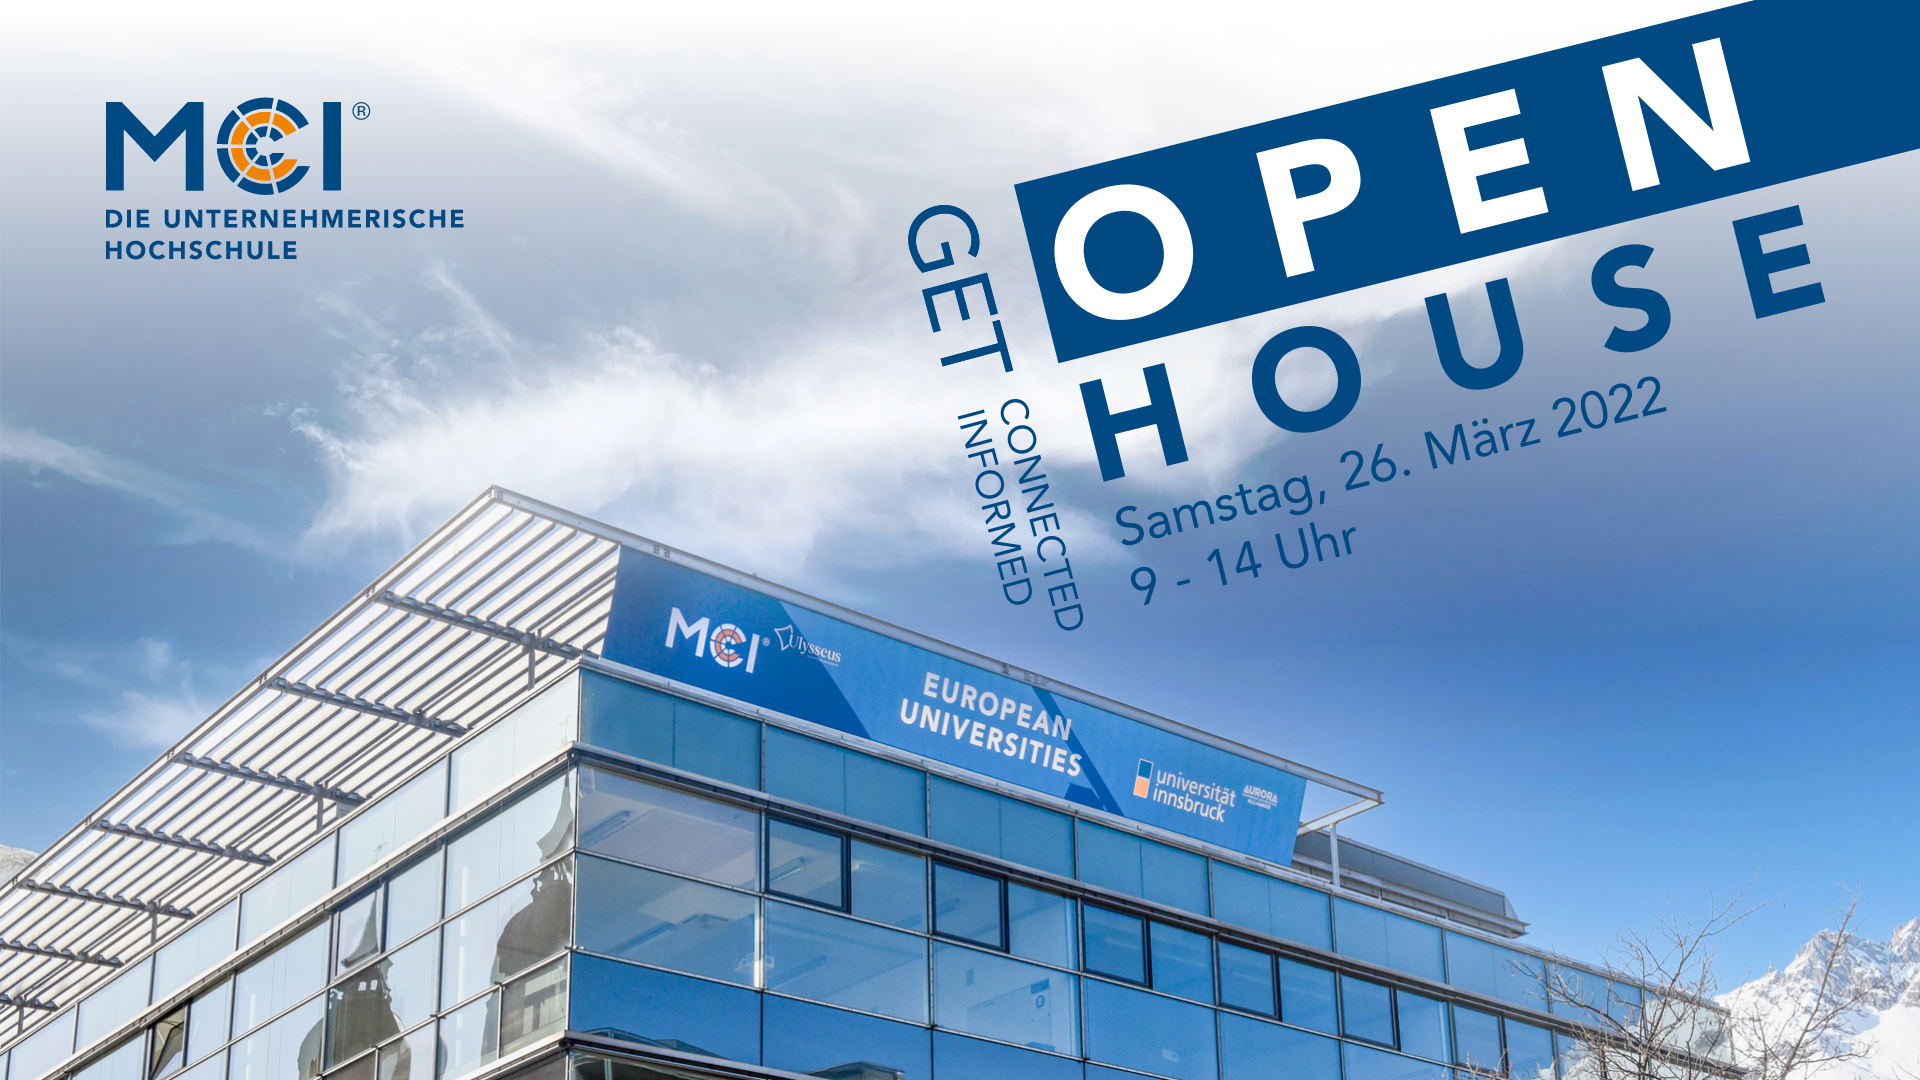 The MCI Open House will take place face-to-face on March 26, 2022.